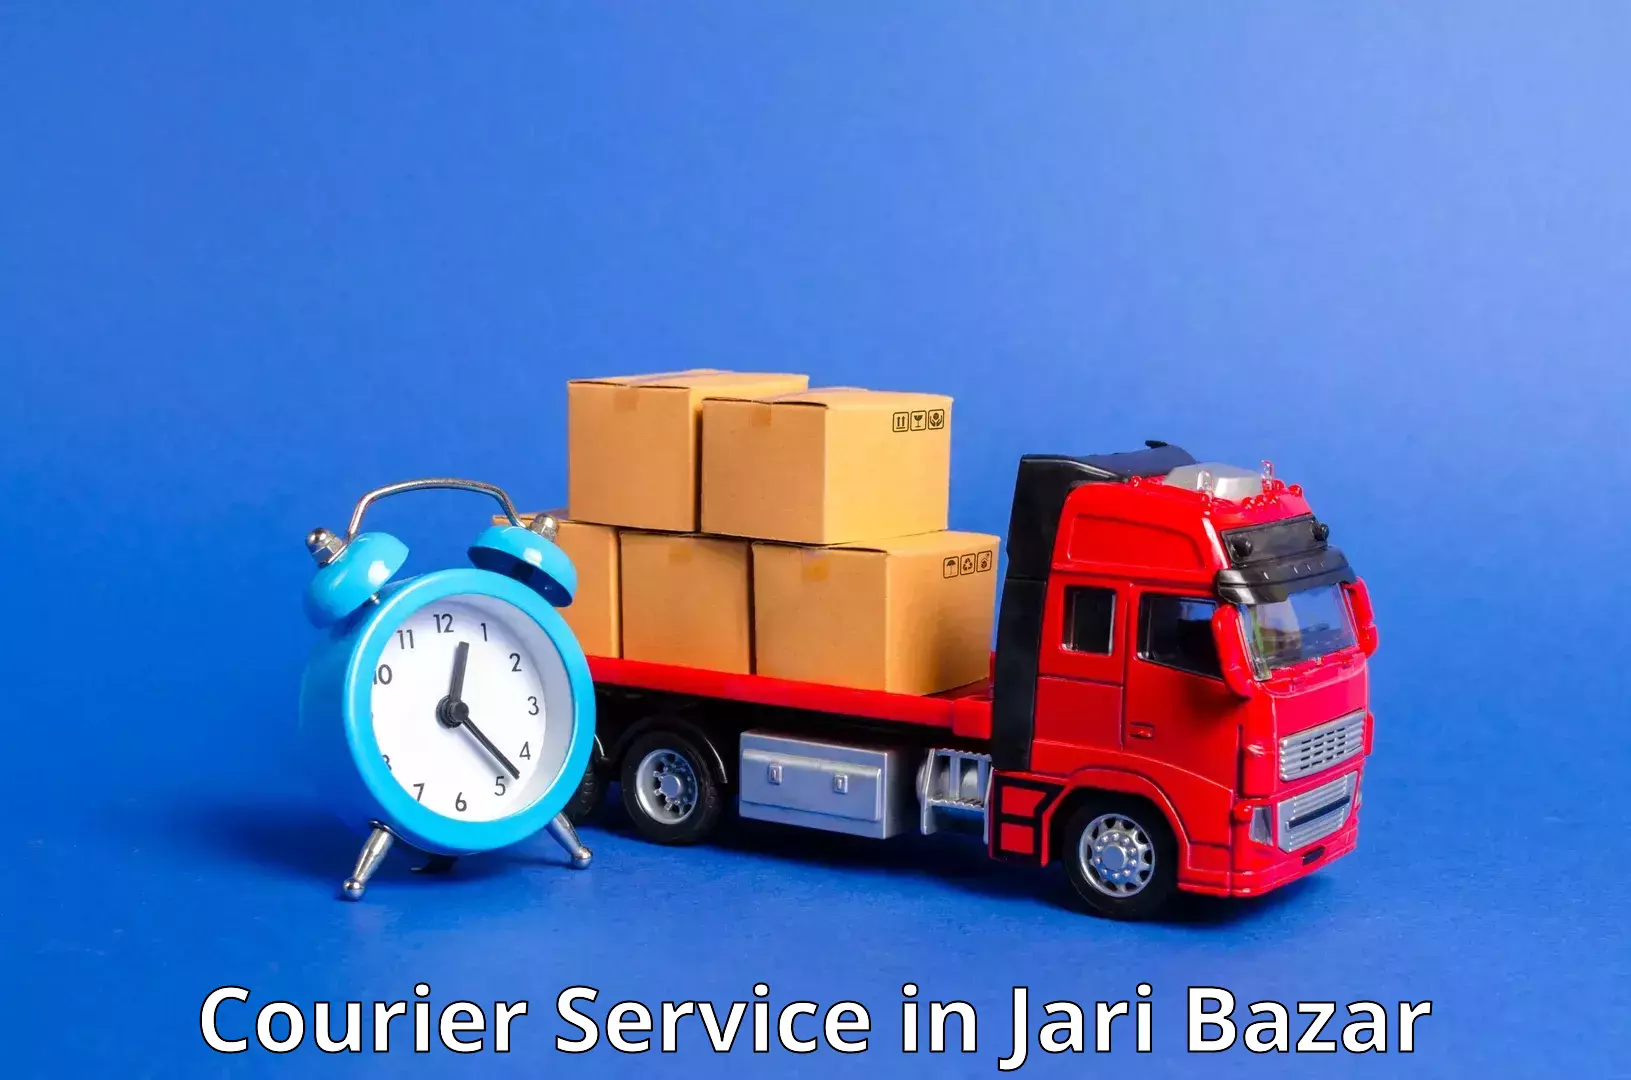 Scalable shipping solutions in Jari Bazar